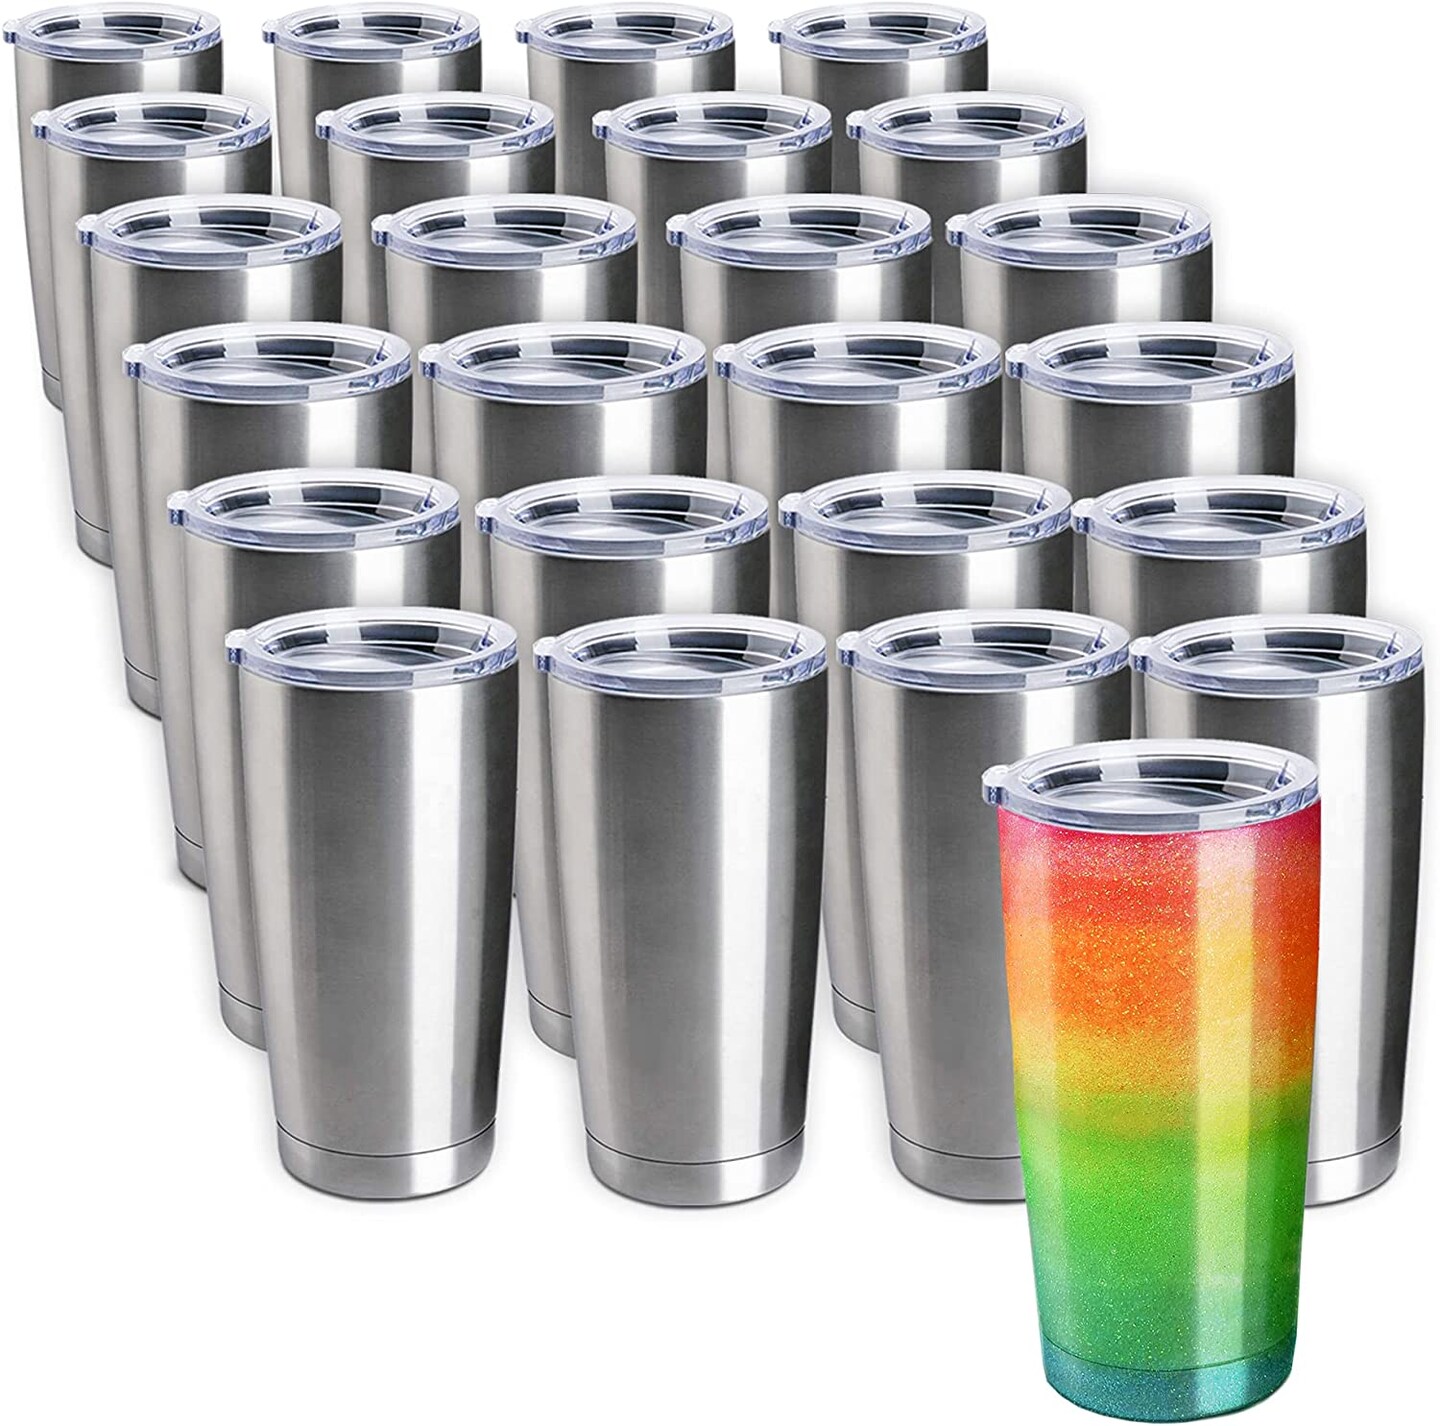 Insulated Double Wall Tumbler